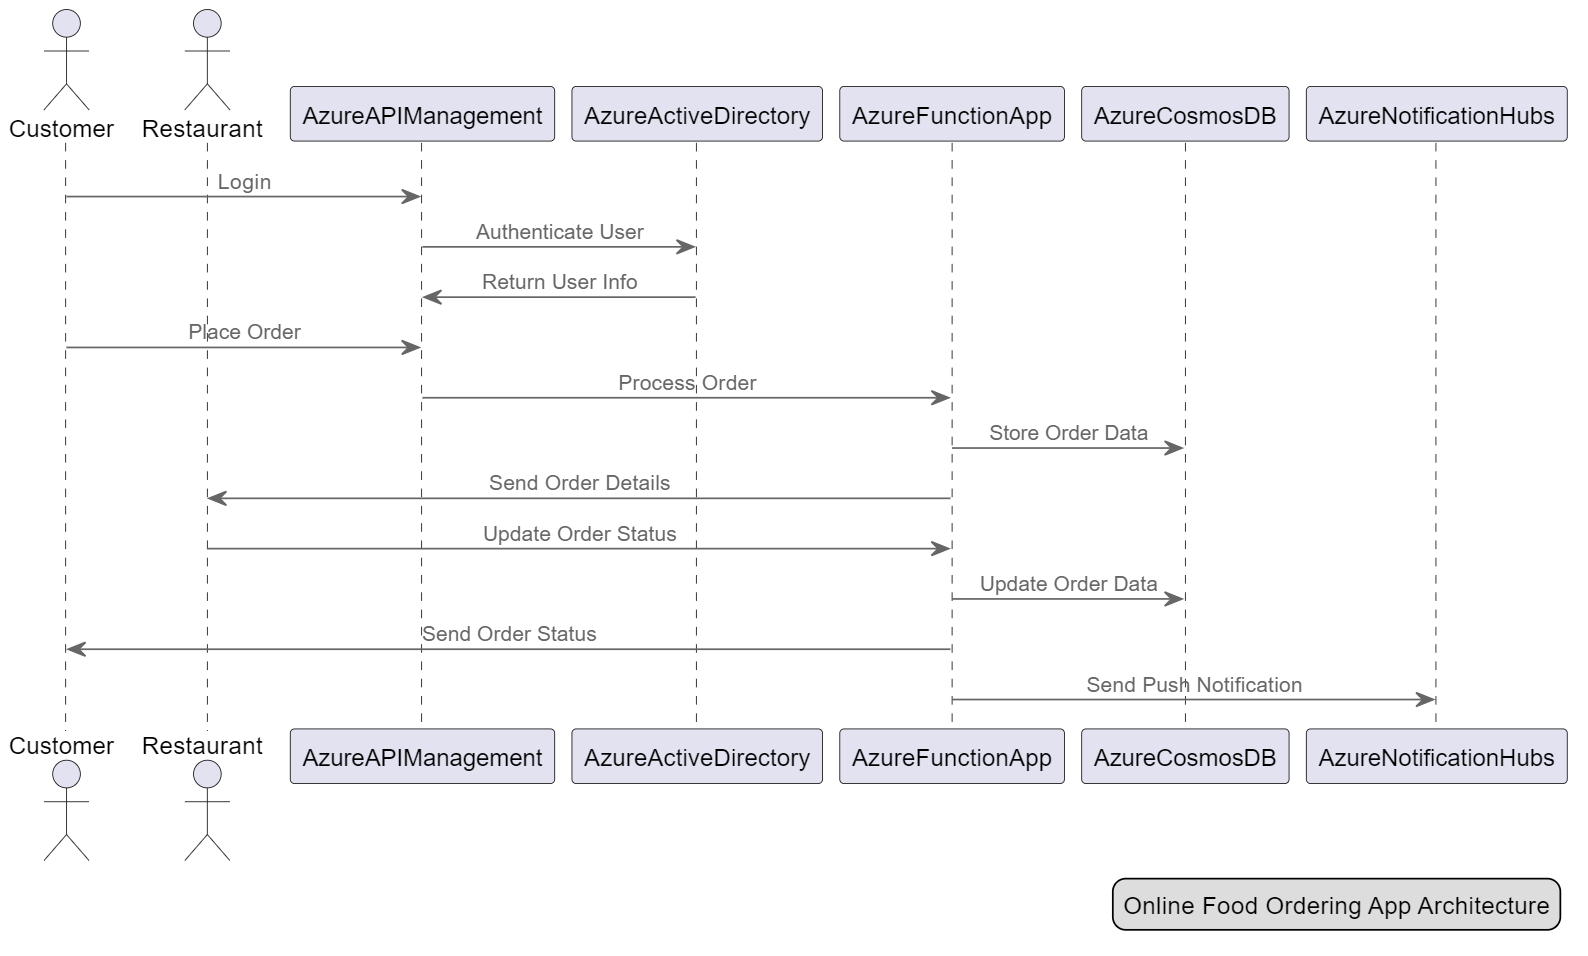 Sequence Diagram for online food ordering